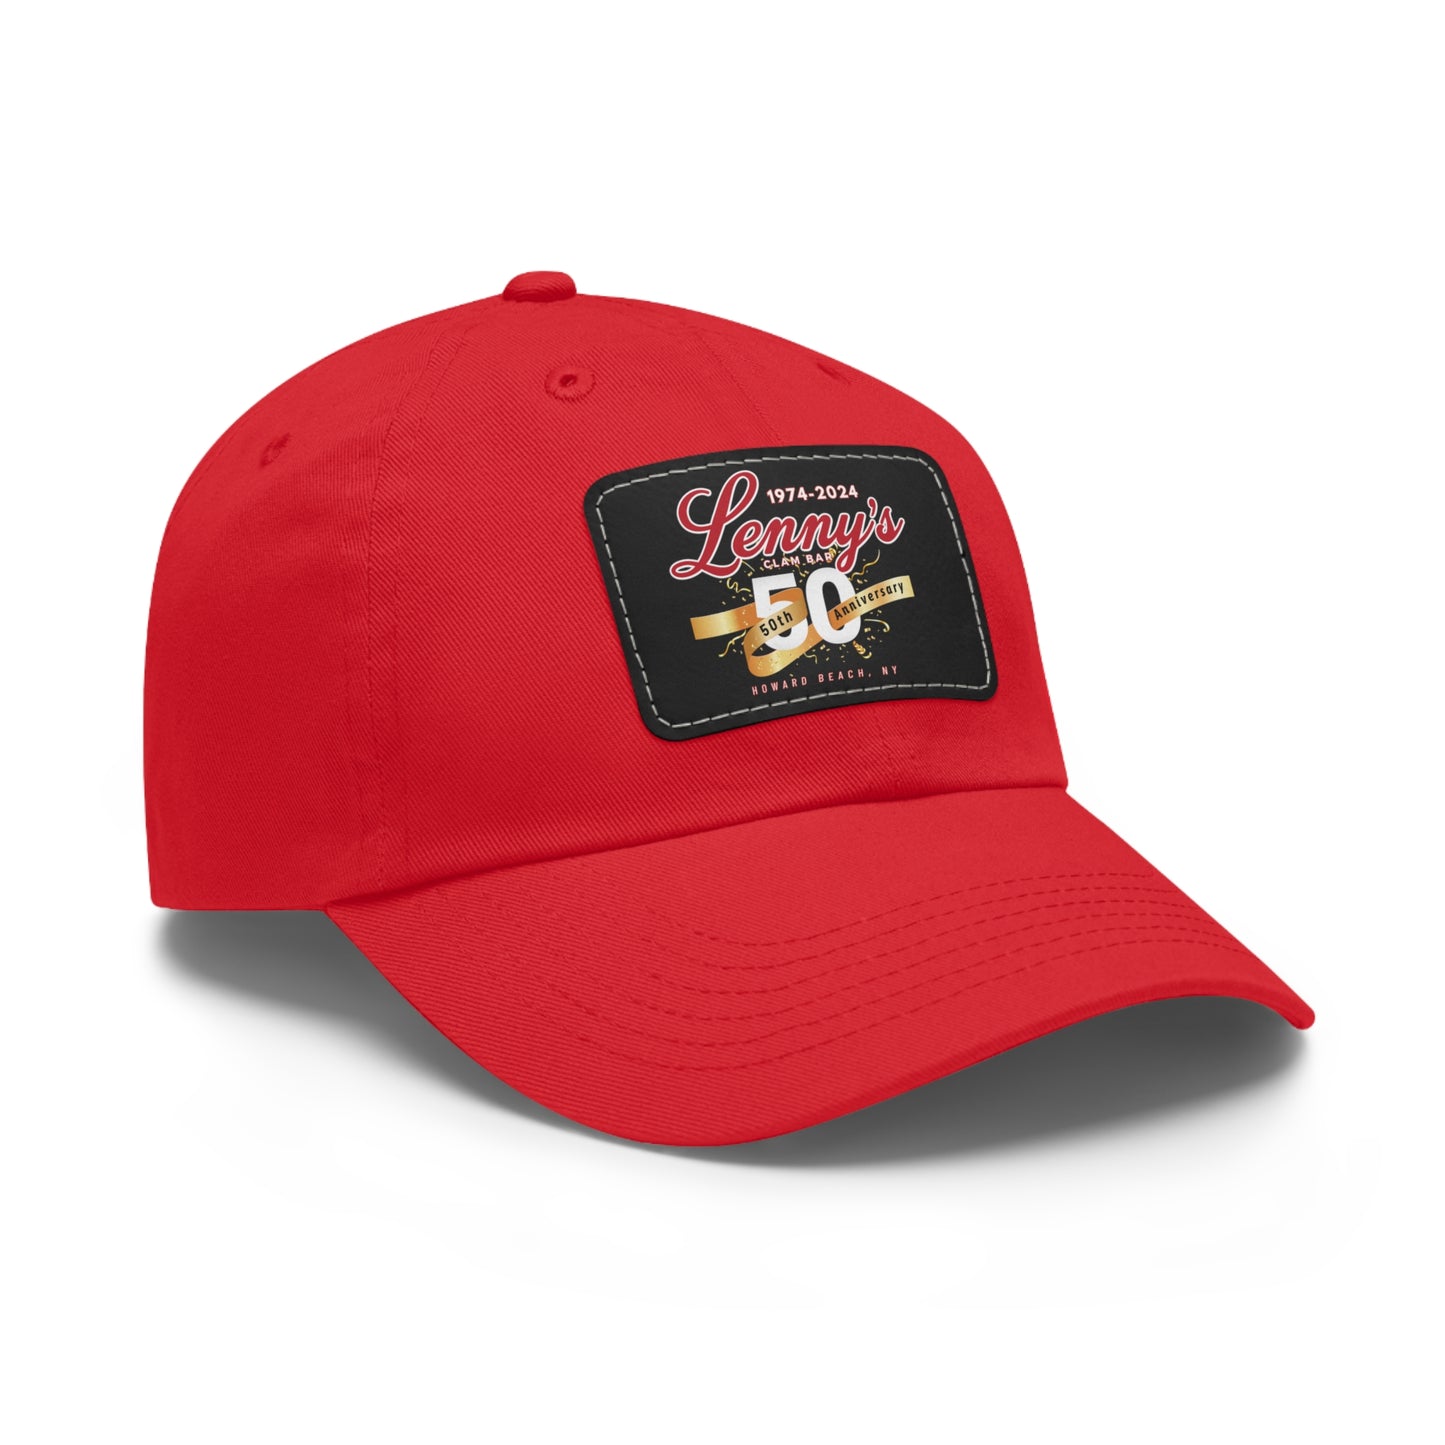 Lenny's 50th Anniversary Dad Hat with Leather Patch